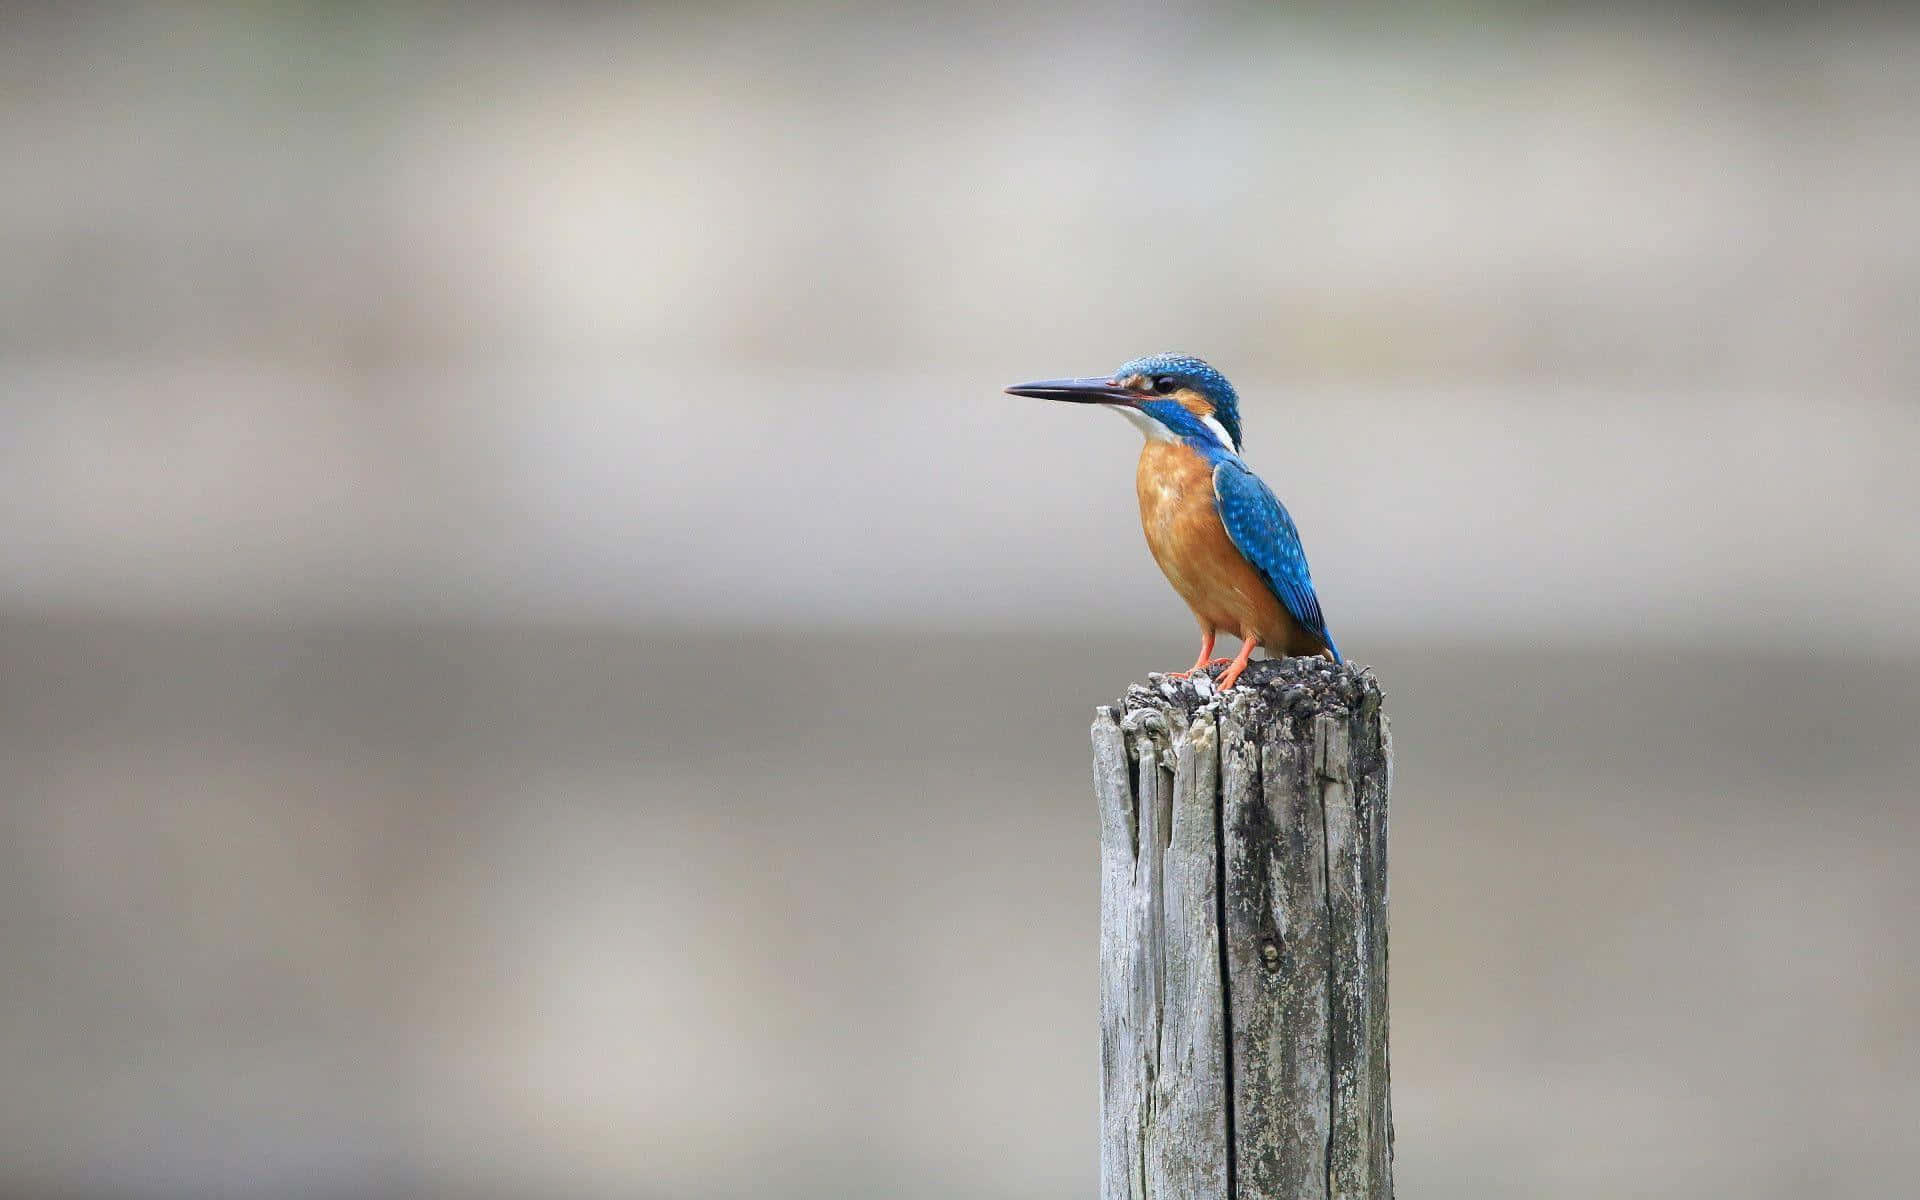 Kingfisher Perchedon Old Wooden Post Wallpaper